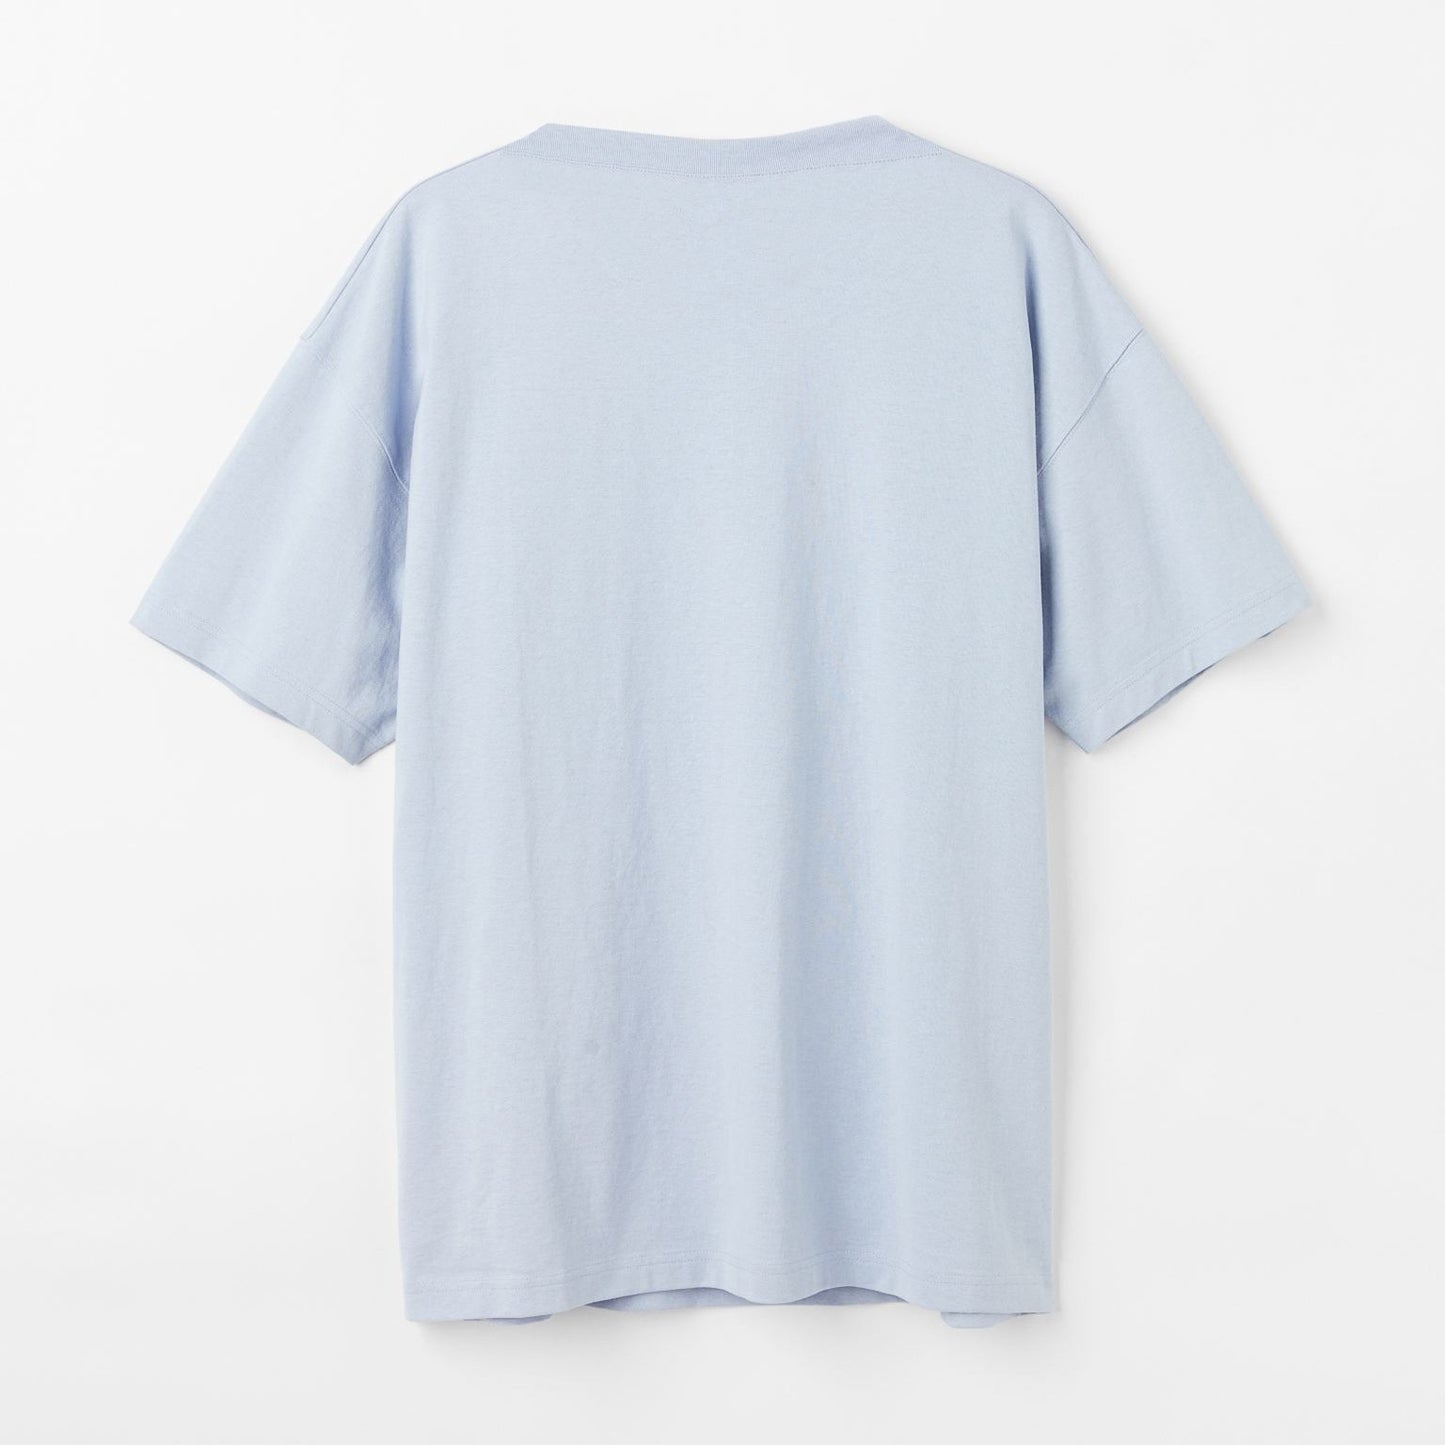 Freedom Graphic Printed Oversized Baby Blue Cotton T-shirt